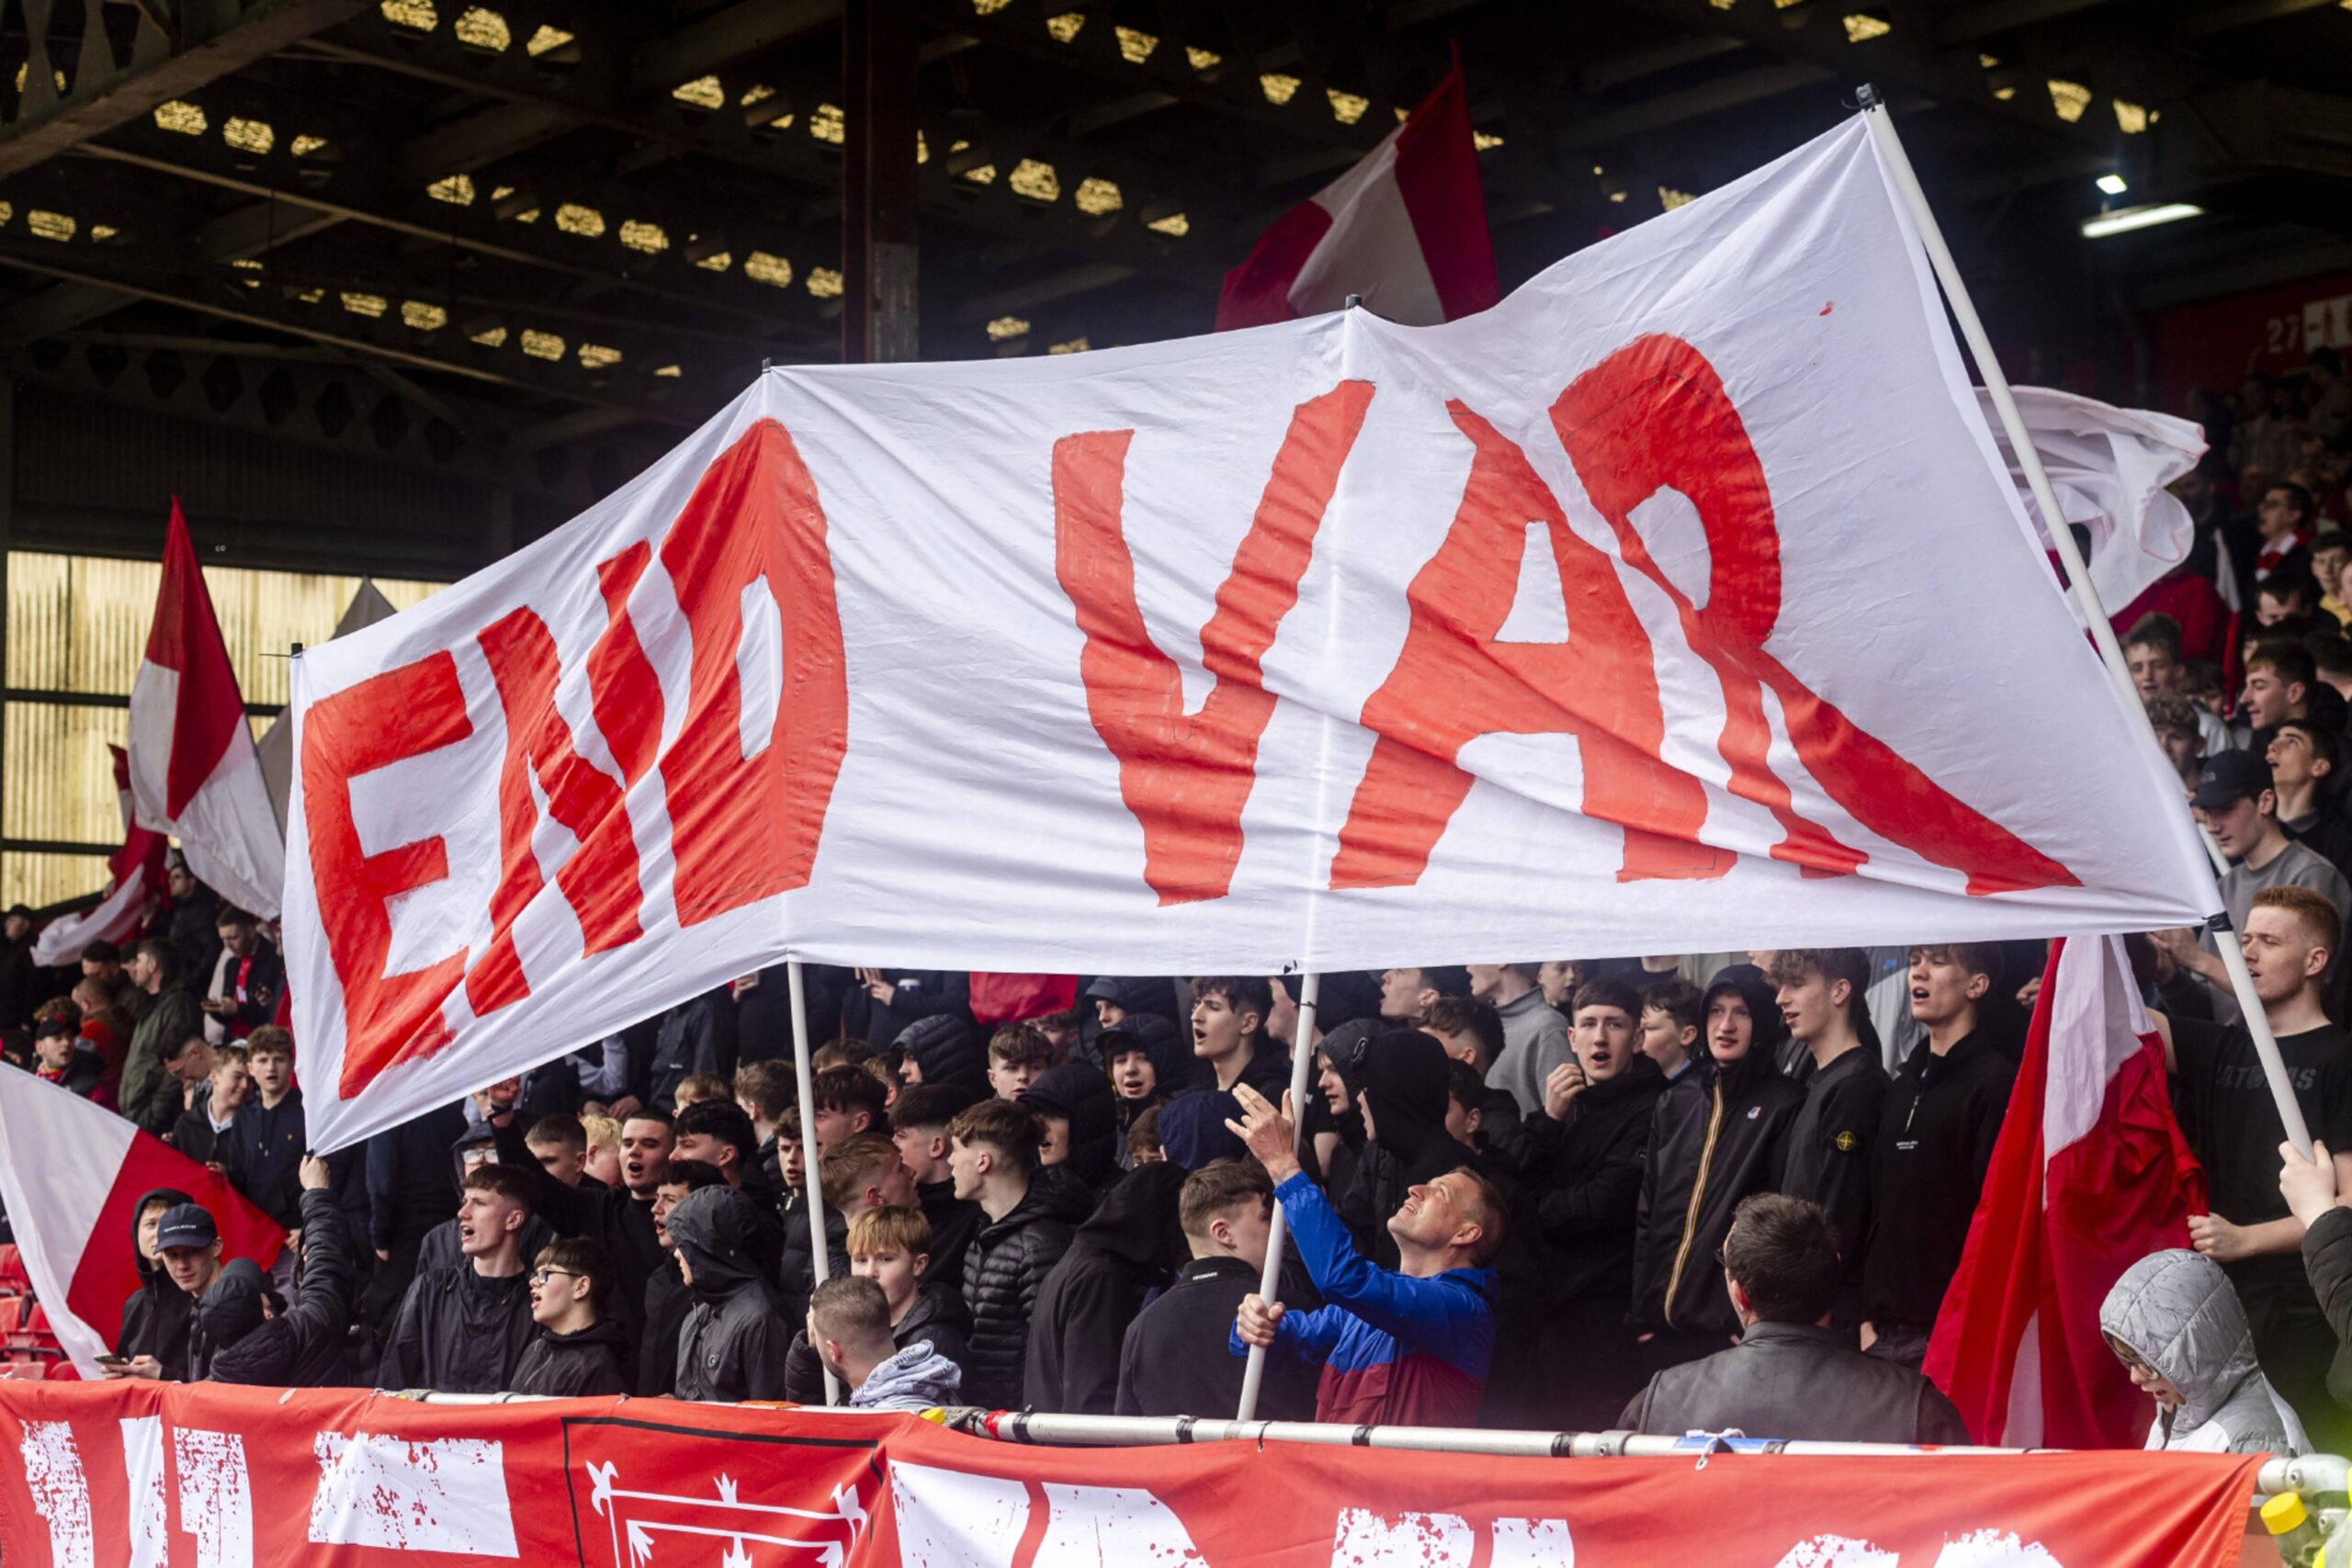 Aberdeen fans hold a sign "END VAR" during gameplay of Scottish Premiership match Aberdeen vs Dundee at Pittodrie.. Image: Shutterstock 